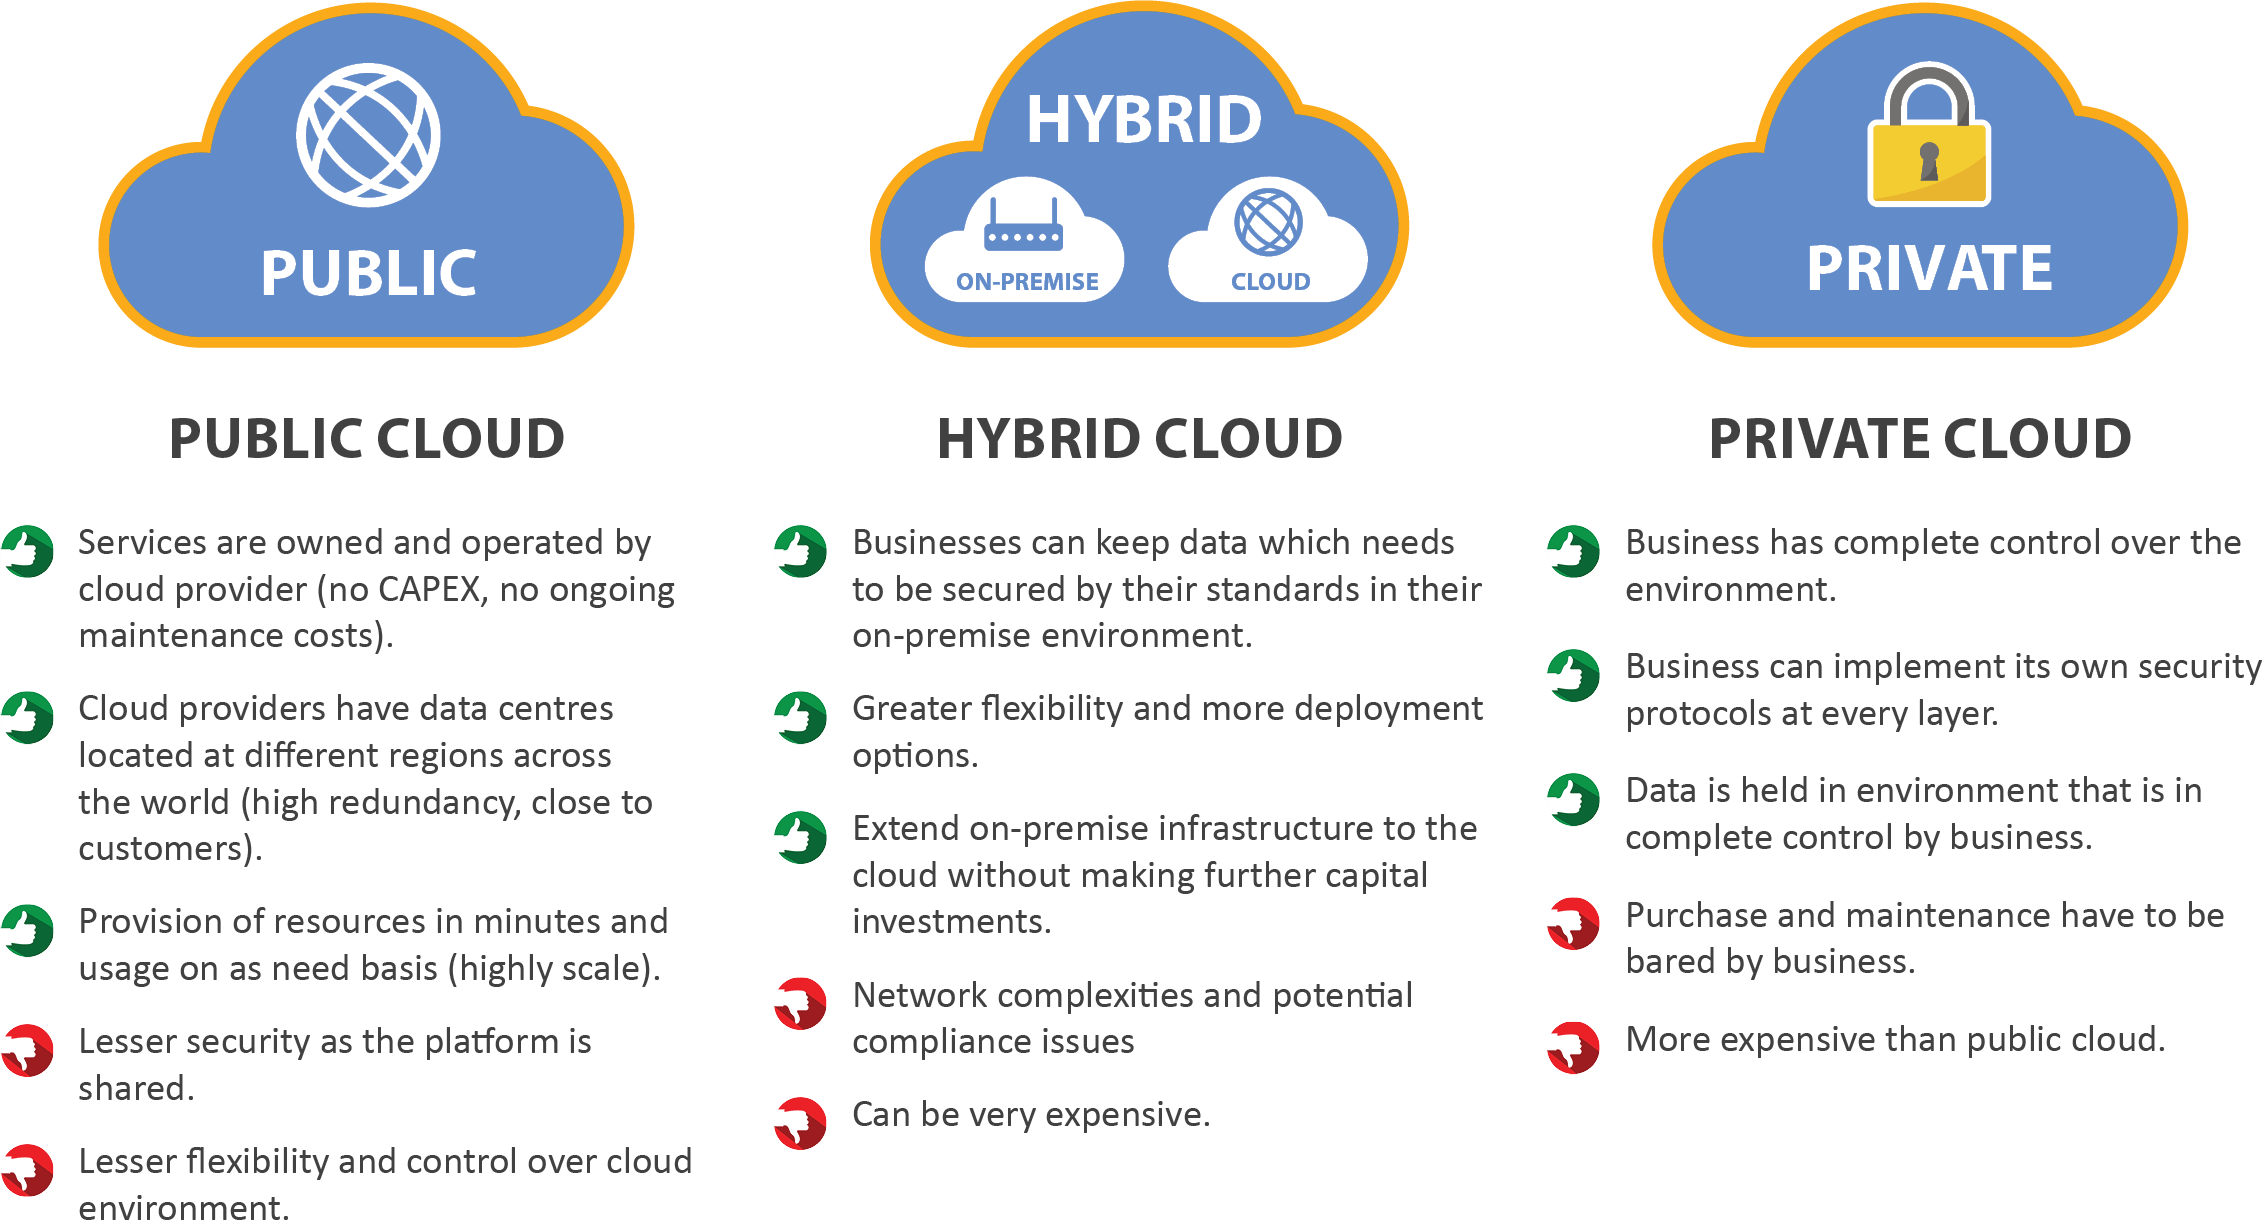 True Cloud vs Fake (Hosted) Cloud: What's the Difference and Why it Matters